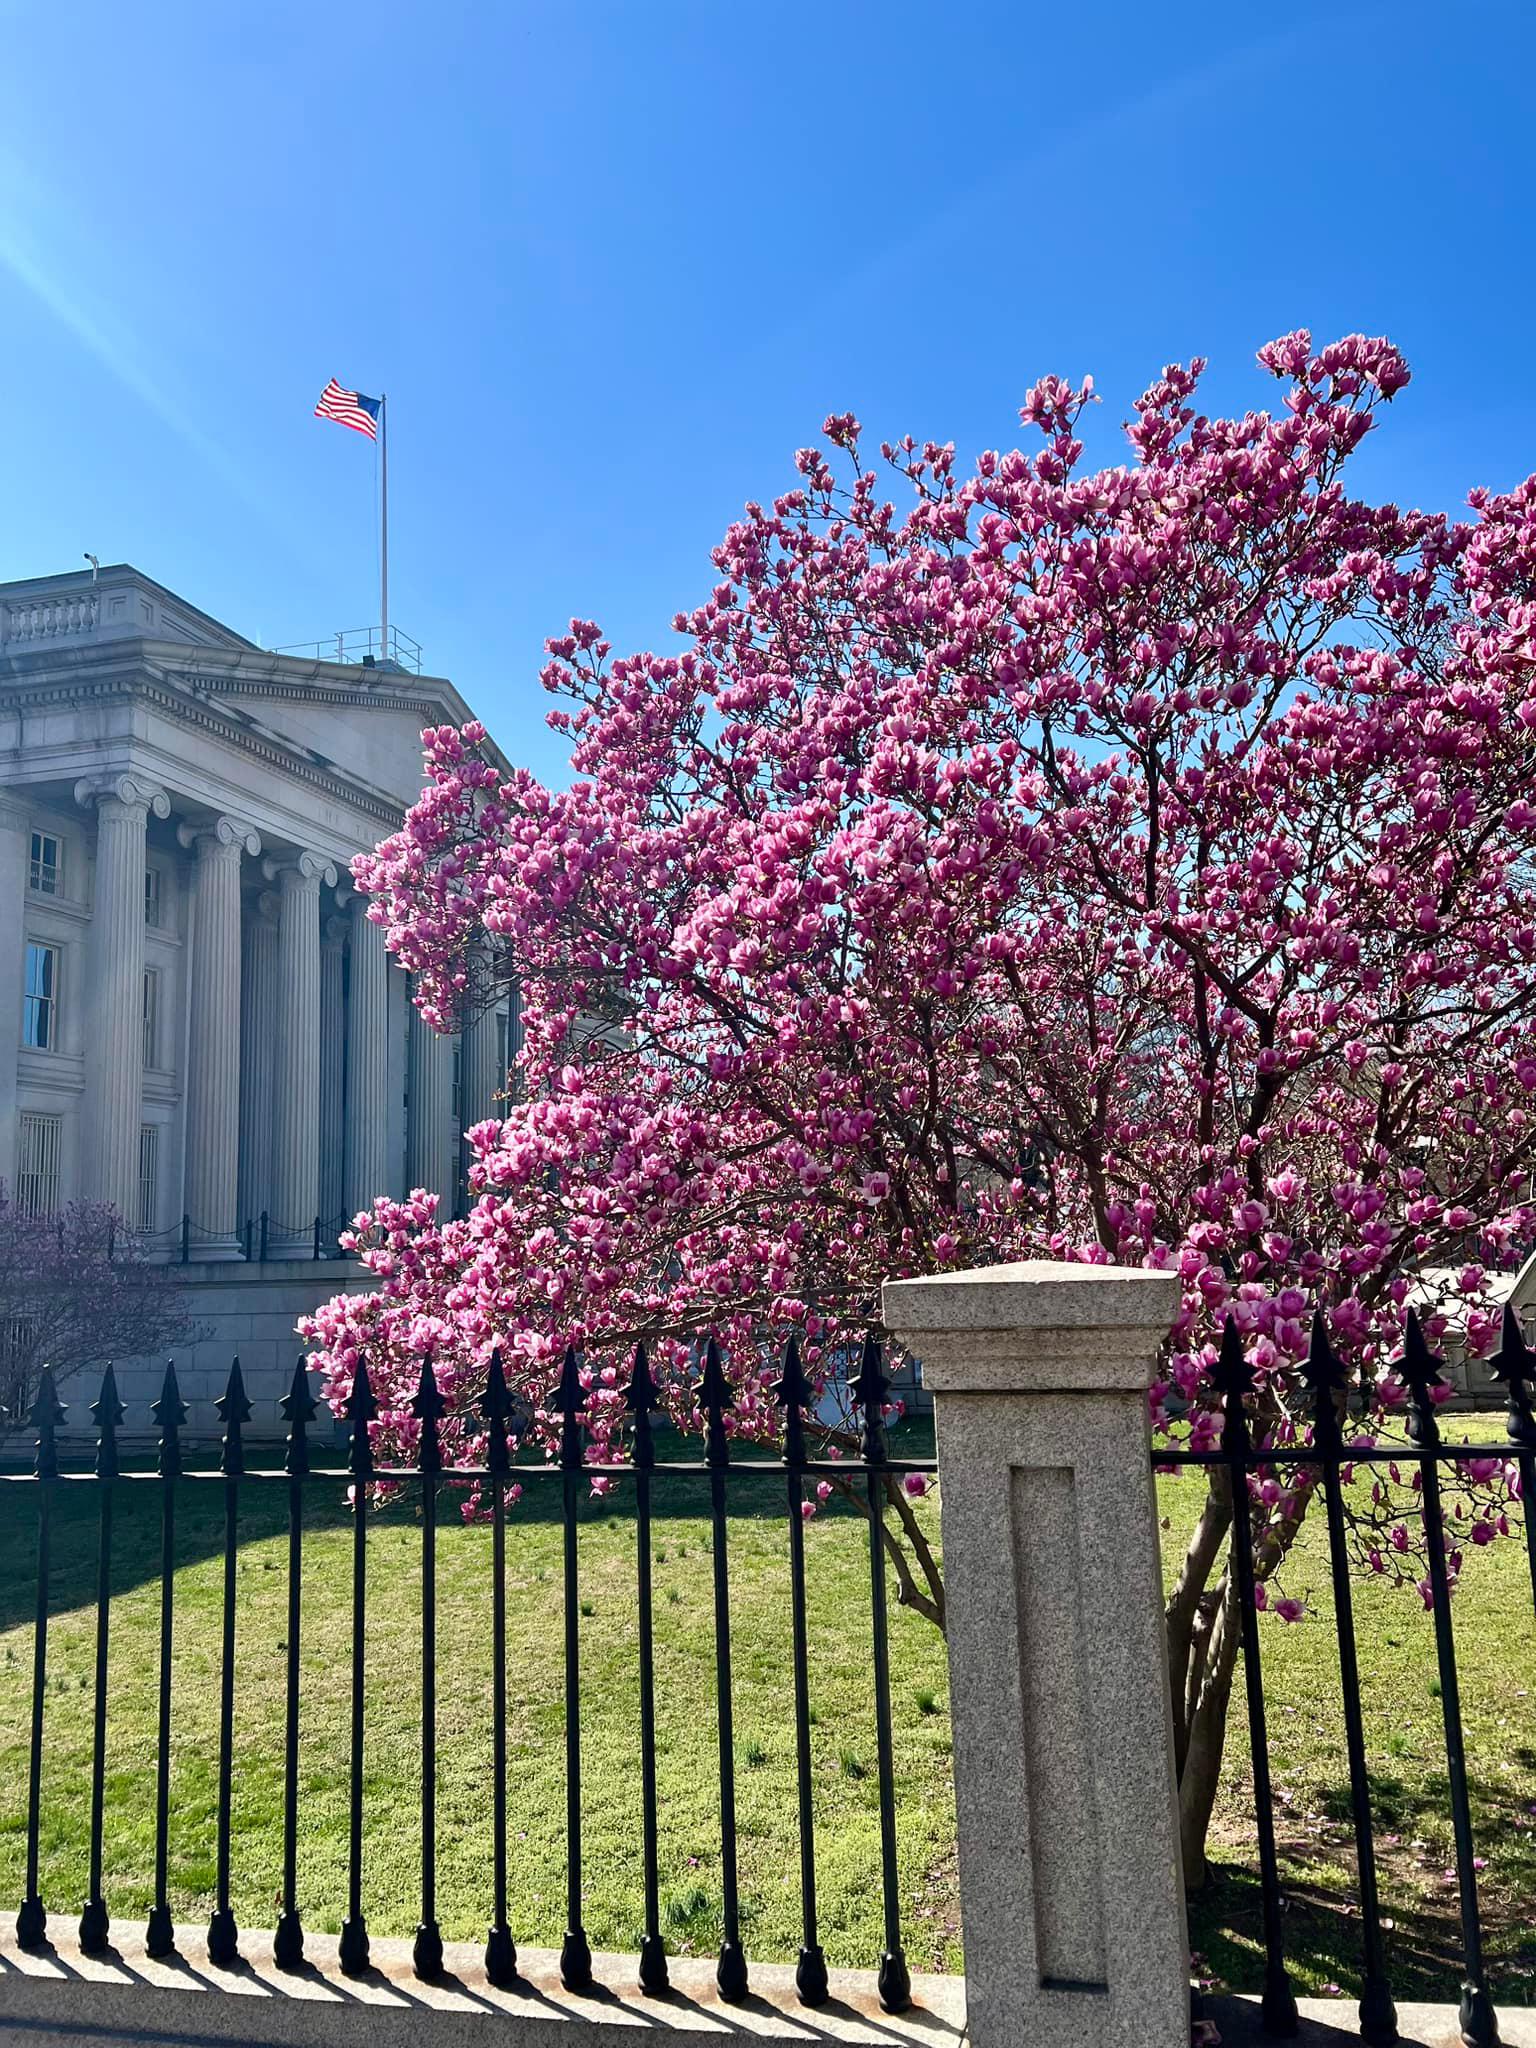 It’s almost here! Mark your calendars for the Cherry Blossom Festival!